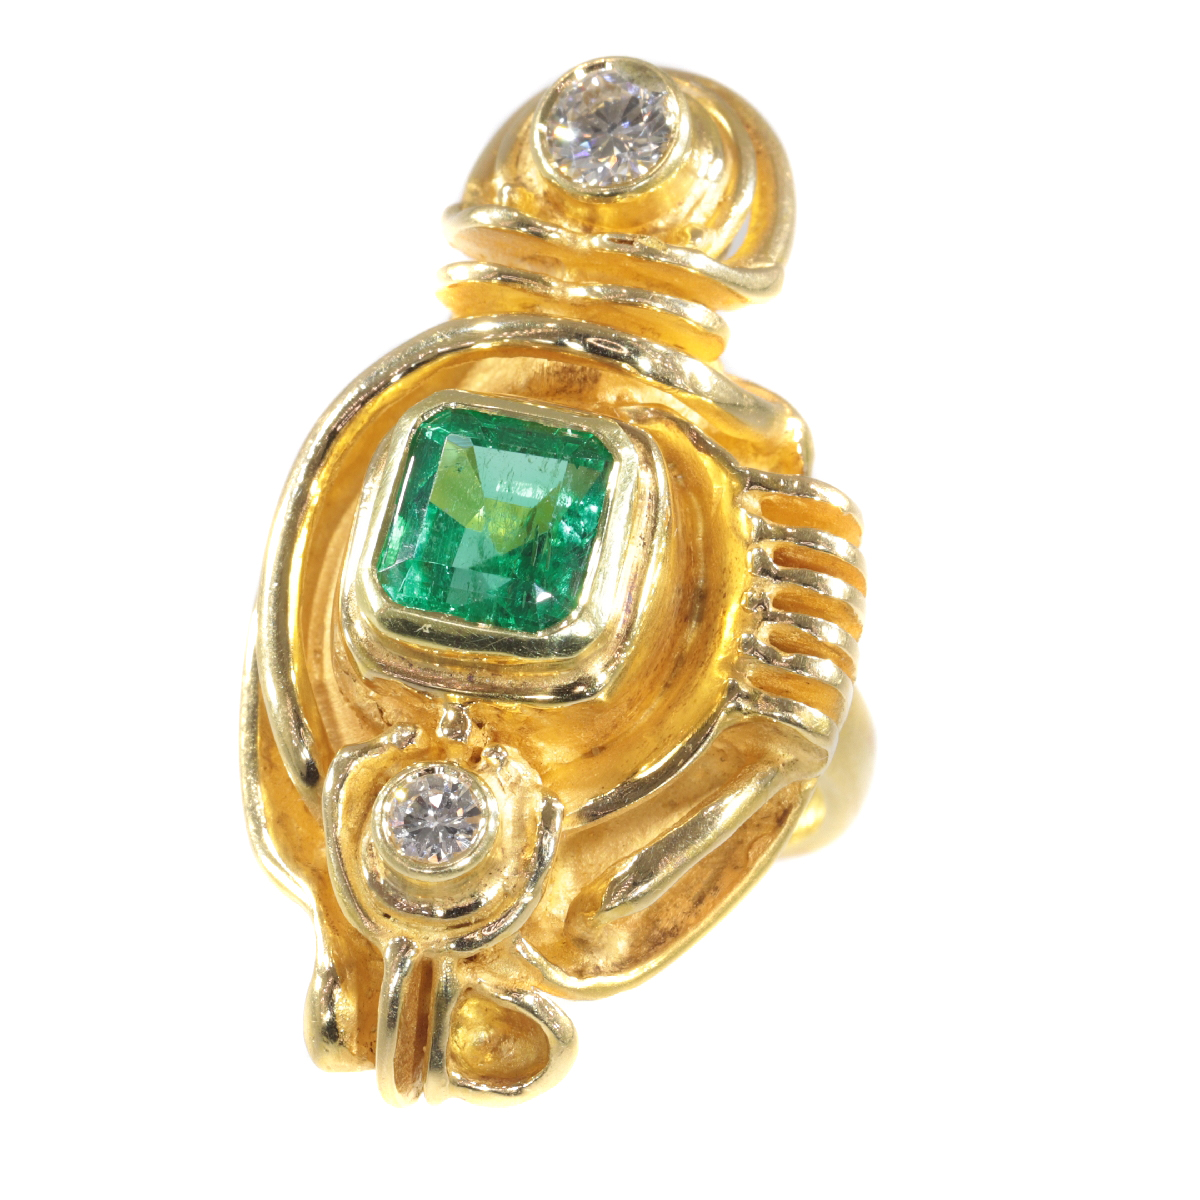 Artist jewellery gold ring by Demaret with diamonds and emerald